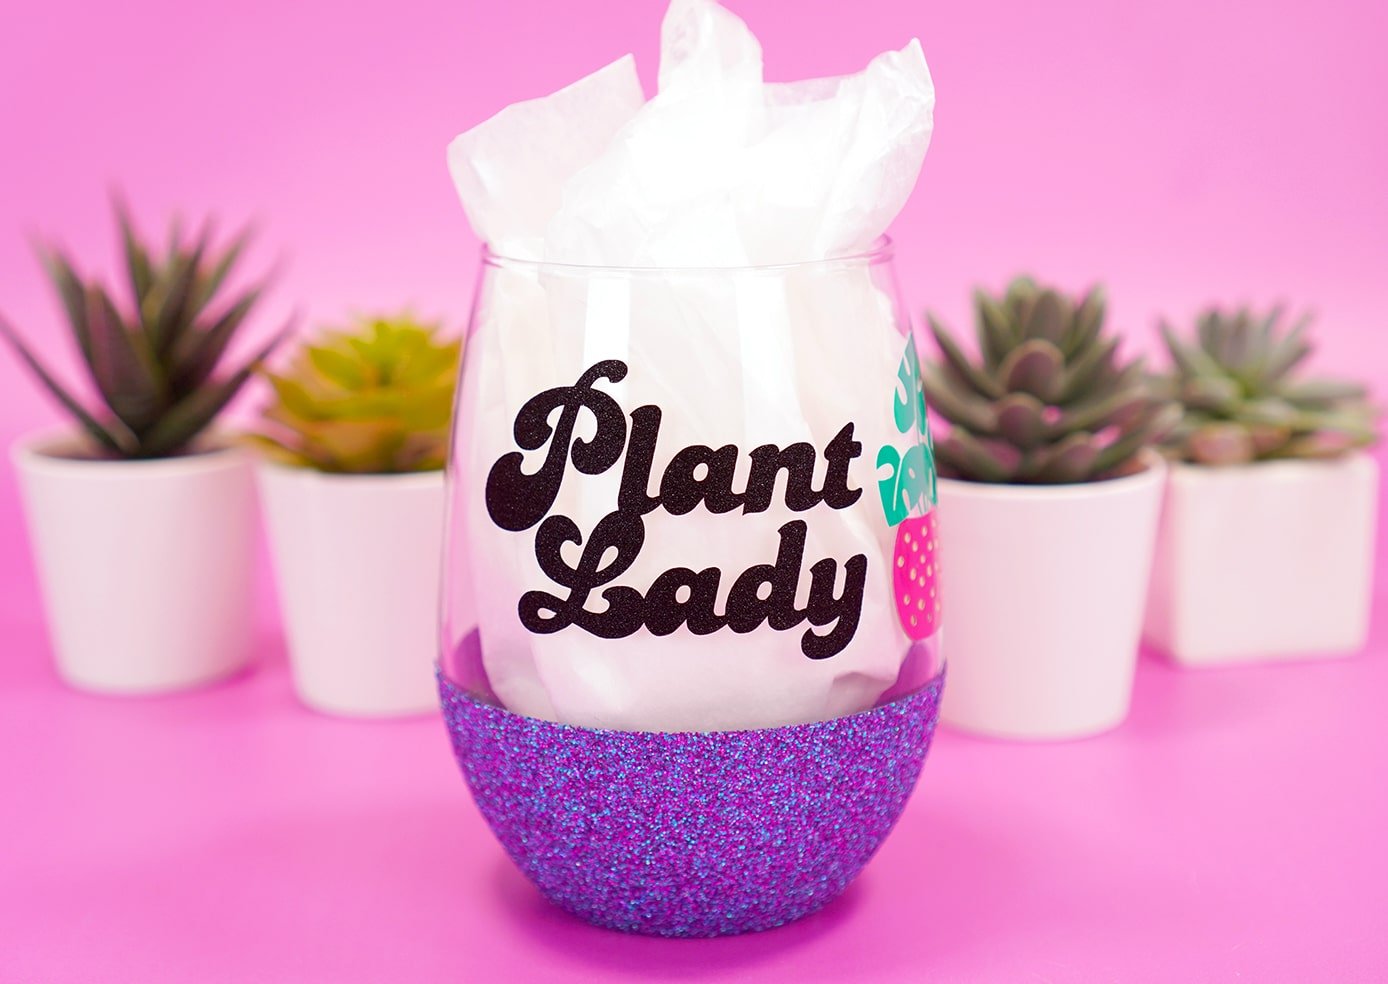 "Plant Lady" glitter wine glass on purple background with plants in background